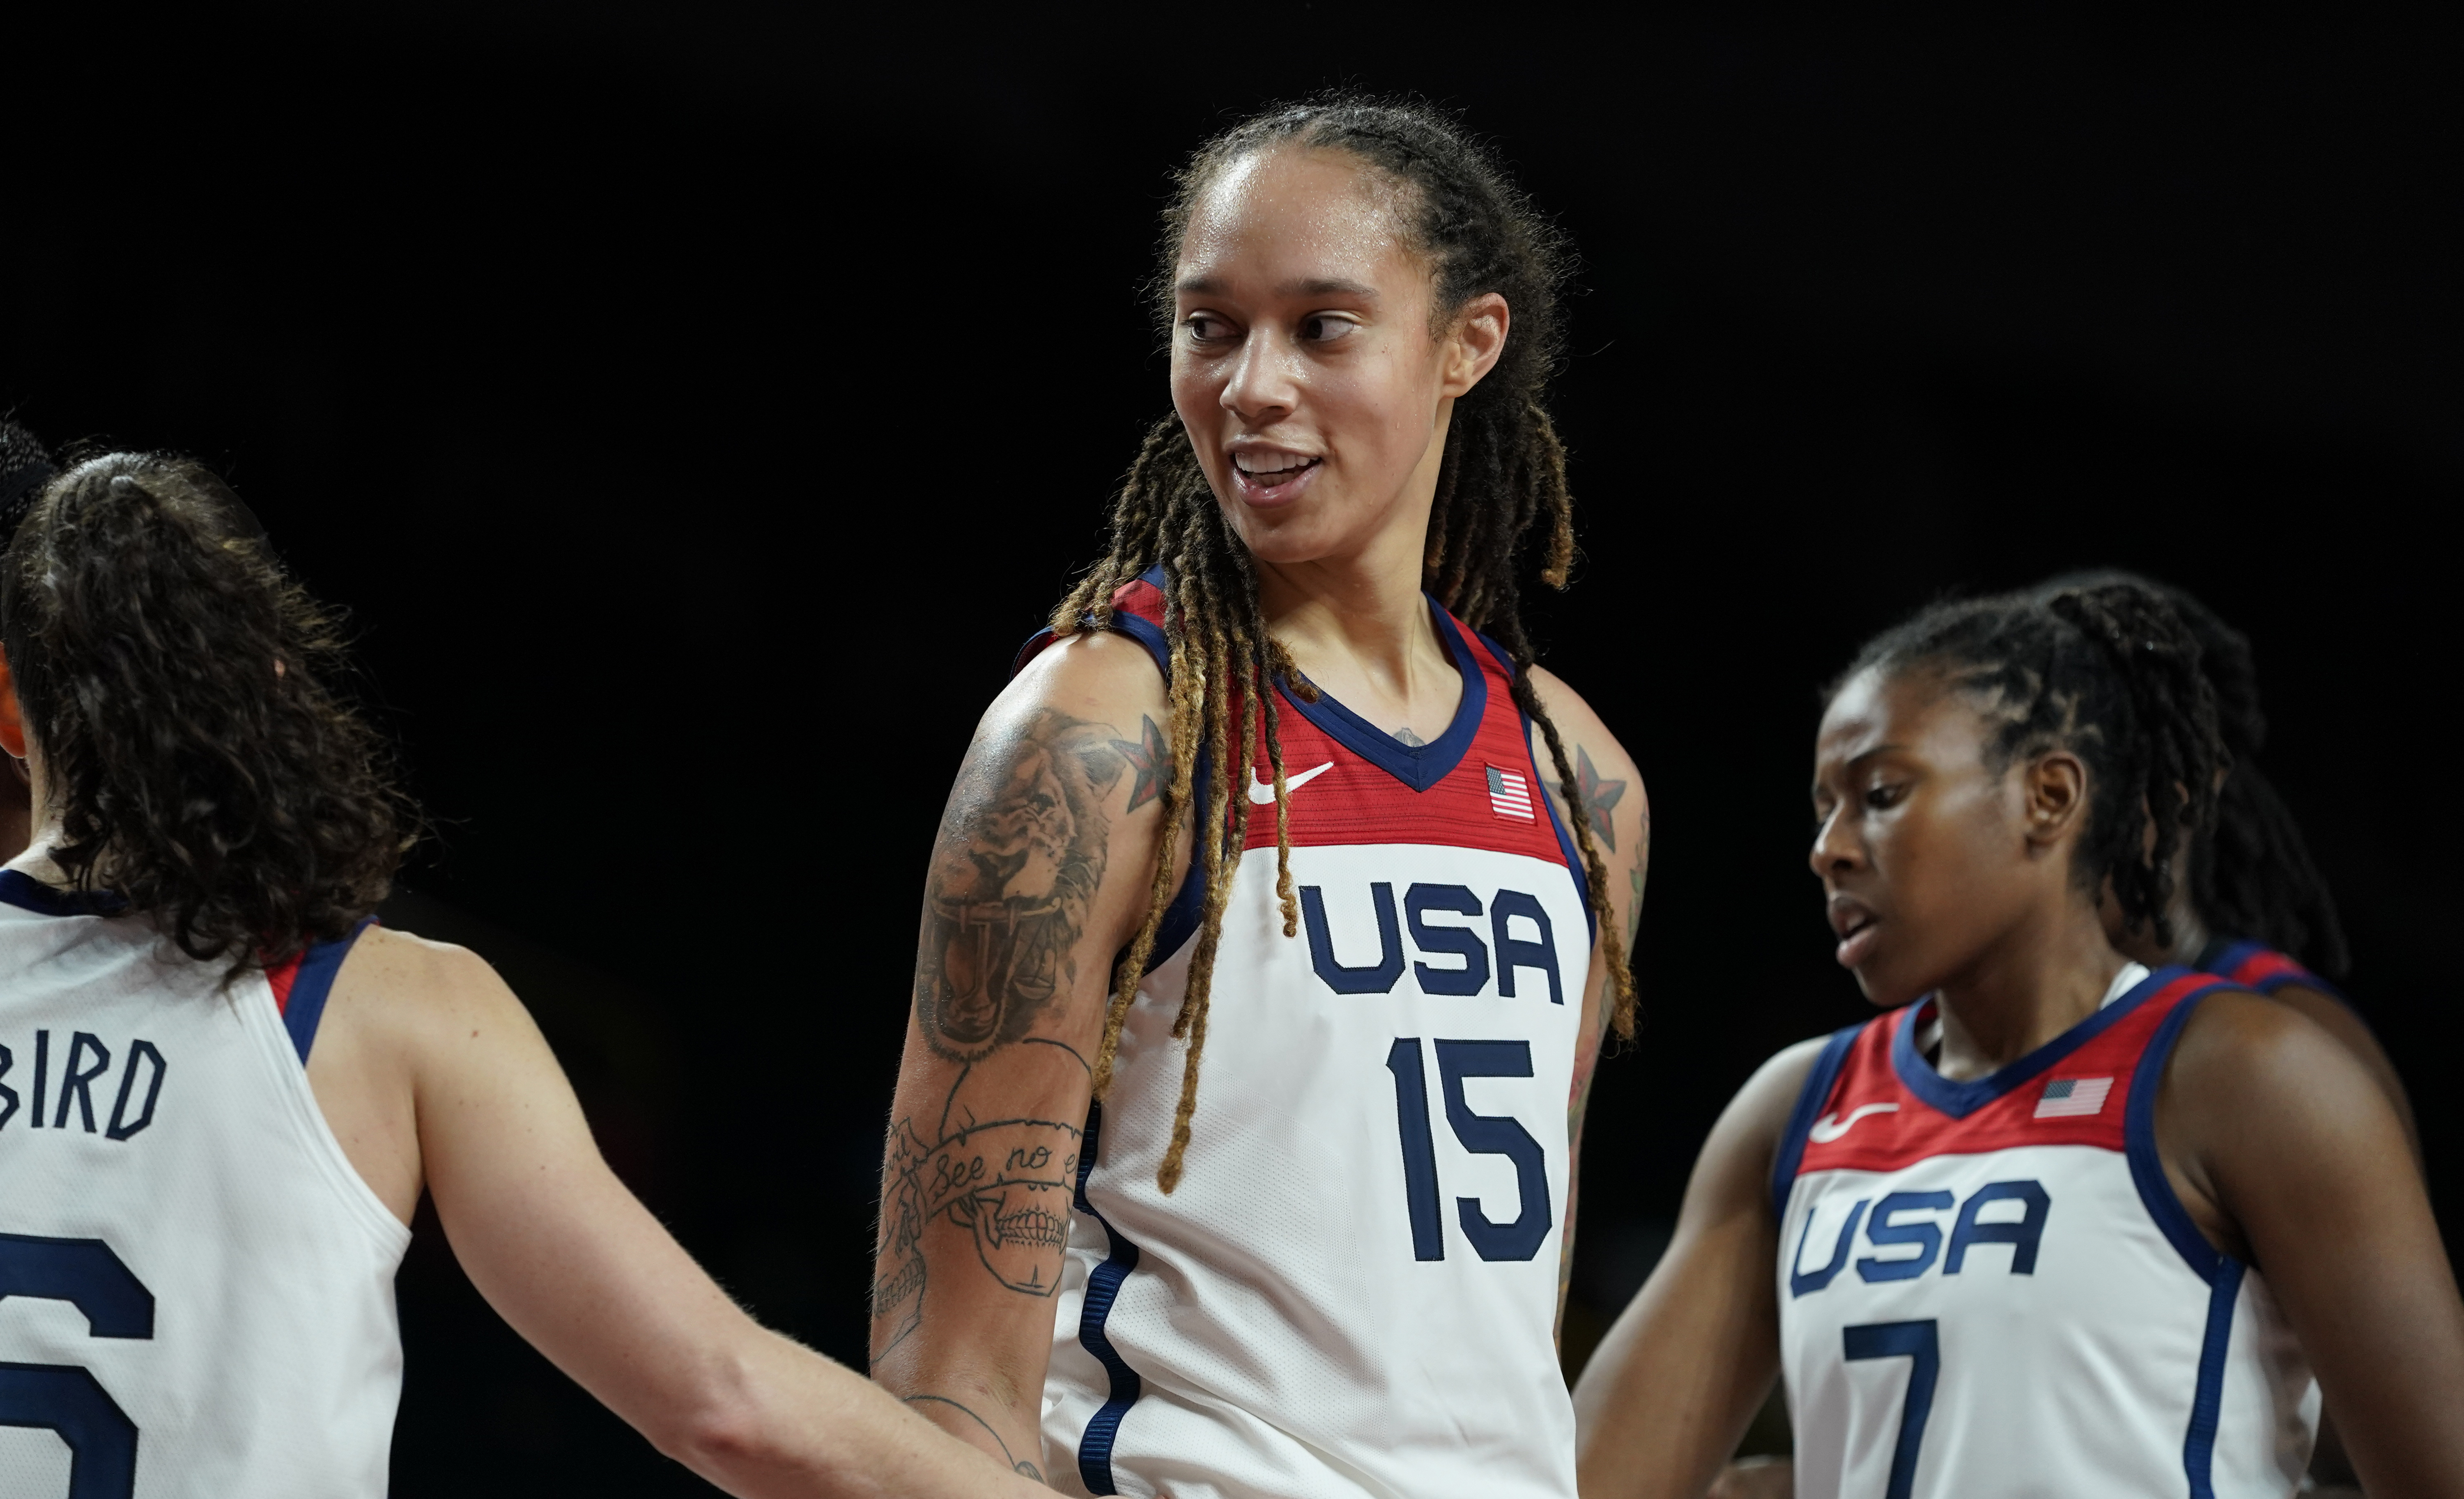 Usa Vs Japan Women S Basketball Free Live Stream 8 7 21 Watch Gold Medal Game At Tokyo Olympics 21 Online Time Tv Channel Nj Com